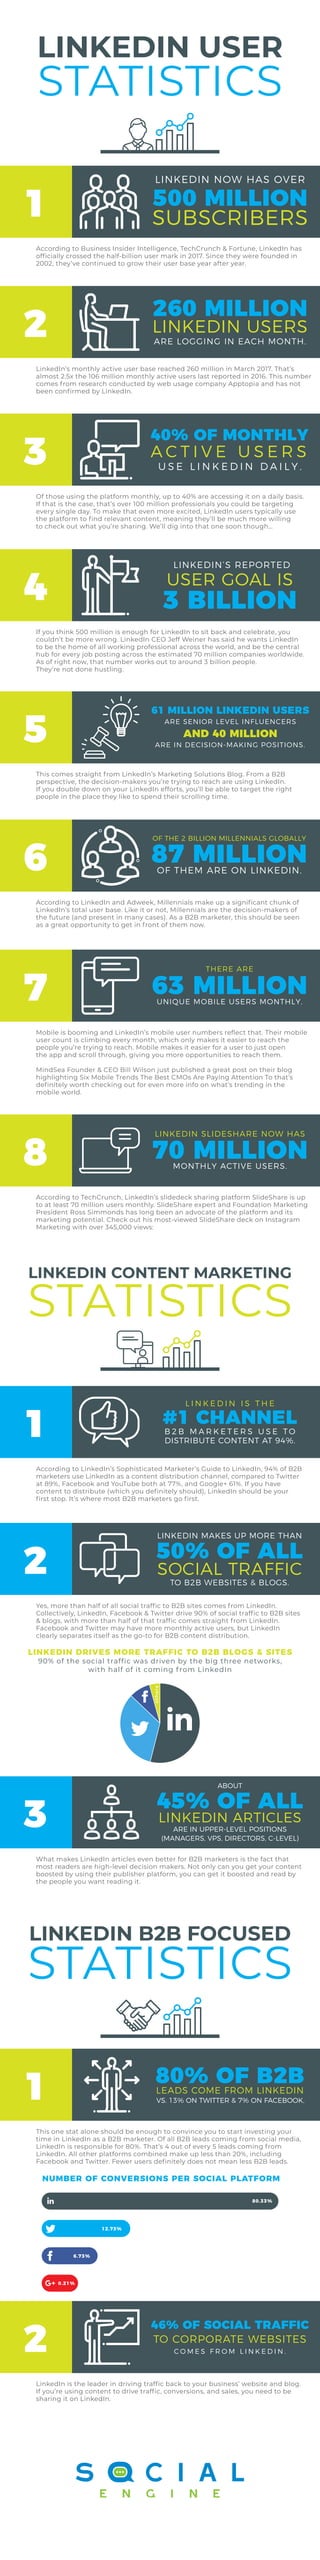 LINKEDIN USER
STATISTICS
LINKEDIN CONTENT MARKETING
STATISTICS
LINKEDIN B2B FOCUSED
STATISTICS
According to Business Insider Intelligence, TechCrunch & Fortune, LinkedIn has
ofﬁcially crossed the half-billion user mark in 2017. Since they were founded in
2002, they’ve continued to grow their user base year after year.
500 MILLION
SUBSCRIBERS
LINKEDIN NOW HAS OVER
1
LinkedIn’s monthly active user base reached 260 million in March 2017. That’s
almost 2.5x the 106 million monthly active users last reported in 2016. This number
comes from research conducted by web usage company Apptopia and has not
been conﬁrmed by LinkedIn.
260 MILLION
LINKEDIN USERS
ARE LOGGING IN EACH MONTH.
2
If you think 500 million is enough for LinkedIn to sit back and celebrate, you
couldn’t be more wrong. LinkedIn CEO Jeff Weiner has said he wants LinkedIn
to be the home of all working professional across the world, and be the central
hub for every job posting across the estimated 70 million companies worldwide.
As of right now, that number works out to around 3 billion people.
They’re not done hustling.
4
Of those using the platform monthly, up to 40% are accessing it on a daily basis.
If that is the case, that’s over 100 million professionals you could be targeting
every single day. To make that even more excited, LinkedIn users typically use
the platform to ﬁnd relevant content, meaning they’ll be much more willing
to check out what you’re sharing. We’ll dig into that one soon though…
40% OF MONTHLY
A C T I V E U S E R S
U S E L I N K E D I N D A I L Y .
3
This comes straight from LinkedIn’s Marketing Solutions Blog. From a B2B
perspective, the decision-makers you’re trying to reach are using LinkedIn.
If you double down on your LinkedIn efforts, you’ll be able to target the right
people in the place they like to spend their scrolling time.
61 MILLION LINKEDIN USERS
AND 40 MILLION
ARE SENIOR LEVEL INFLUENCERS
ARE IN DECISION-MAKING POSITIONS.
5
According to LinkedIn and Adweek, Millennials make up a signiﬁcant chunk of
LinkedIn’s total user base. Like it or not, Millennials are the decision-makers of
the future (and present in many cases). As a B2B marketer, this should be seen
as a great opportunity to get in front of them now.
OF THE 2 BILLION MILLENNIALS GLOBALLY
87 MILLIONOF THEM ARE ON LINKEDIN.6
Mobile is booming and LinkedIn’s mobile user numbers reﬂect that. Their mobile
user count is climbing every month, which only makes it easier to reach the
people you’re trying to reach. Mobile makes it easier for a user to just open
the app and scroll through, giving you more opportunities to reach them.
MindSea Founder & CEO Bill Wilson just published a great post on their blog
highlighting Six Mobile Trends The Best CMOs Are Paying Attention To that’s
deﬁnitely worth checking out for even more info on what’s trending in the
mobile world.
THERE ARE
63 MILLIONUNIQUE MOBILE USERS MONTHLY.
According to TechCrunch, LinkedIn’s slidedeck sharing platform SlideShare is up
to at least 70 million users monthly. SlideShare expert and Foundation Marketing
President Ross Simmonds has long been an advocate of the platform and its
marketing potential. Check out his most-viewed SlideShare deck on Instagram
Marketing with over 345,000 views:
7
LINKEDIN SLIDESHARE NOW HAS
70 MILLIONMONTHLY ACTIVE USERS.8
According to LinkedIn’s Sophisticated Marketer’s Guide to LinkedIn, 94% of B2B
marketers use LinkedIn as a content distribution channel, compared to Twitter
at 89%, Facebook and YouTube both at 77%, and Google+ 61%. If you have
content to distribute (which you deﬁnitely should), LinkedIn should be your
ﬁrst stop. It’s where most B2B marketers go ﬁrst.
L I N K E D I N I S T H E
#1 CHANNEL
B 2 B M A R K E T E R S U S E T O
DISTRIBUTE CONTENT AT 94%.
1
Yes, more than half of all social trafﬁc to B2B sites comes from LinkedIn.
Collectively, LinkedIn, Facebook & Twitter drive 90% of social trafﬁc to B2B sites
& blogs, with more than half of that trafﬁc comes straight from LinkedIn.
Facebook and Twitter may have more monthly active users, but LinkedIn
clearly separates itself as the go-to for B2B content distribution.
2
3 BILLION
LINKEDIN’S REPORTED
USER GOAL IS
LINKEDIN MAKES UP MORE THAN
TO B2B WEBSITES & BLOGS.
50% OF ALL
SOCIAL TRAFFIC
What makes LinkedIn articles even better for B2B marketers is the fact that
most readers are high-level decision makers. Not only can you get your content
boosted by using their publisher platform, you can get it boosted and read by
the people you want reading it.
This one stat alone should be enough to convince you to start investing your
time in LinkedIn as a B2B marketer. Of all B2B leads coming from social media,
LinkedIn is responsible for 80%. That’s 4 out of every 5 leads coming from
LinkedIn. All other platforms combined make up less than 20%, including
Facebook and Twitter. Fewer users deﬁnitely does not mean less B2B leads.
3
ABOUT
ARE IN UPPER-LEVEL POSITIONS
(MANAGERS, VPS, DIRECTORS, C-LEVEL)
45% OF ALL
LINKEDIN ARTICLES
1 VS. 13% ON TWITTER & 7% ON FACEBOOK.
80% OF B2BLEADS COME FROM LINKEDIN
LinkedIn is the leader in driving trafﬁc back to your business’ website and blog.
If you’re using content to drive trafﬁc, conversions, and sales, you need to be
sharing it on LinkedIn.
2 C O M E S F R O M L I N K E D I N .
46% OF SOCIAL TRAFFIC
TO CORPORATE WEBSITES
LINKEDIN DRIVES MORE TRAFFIC TO B2B BLOGS & SITES
90% of the social trafﬁc was driven by the big three networks,
with half of it coming f rom LinkedIn
others
80.33%
0.21%
6.73%
12.73%
NUMBER OF CONVERSIONS PER SOCIAL PLATFORM
 